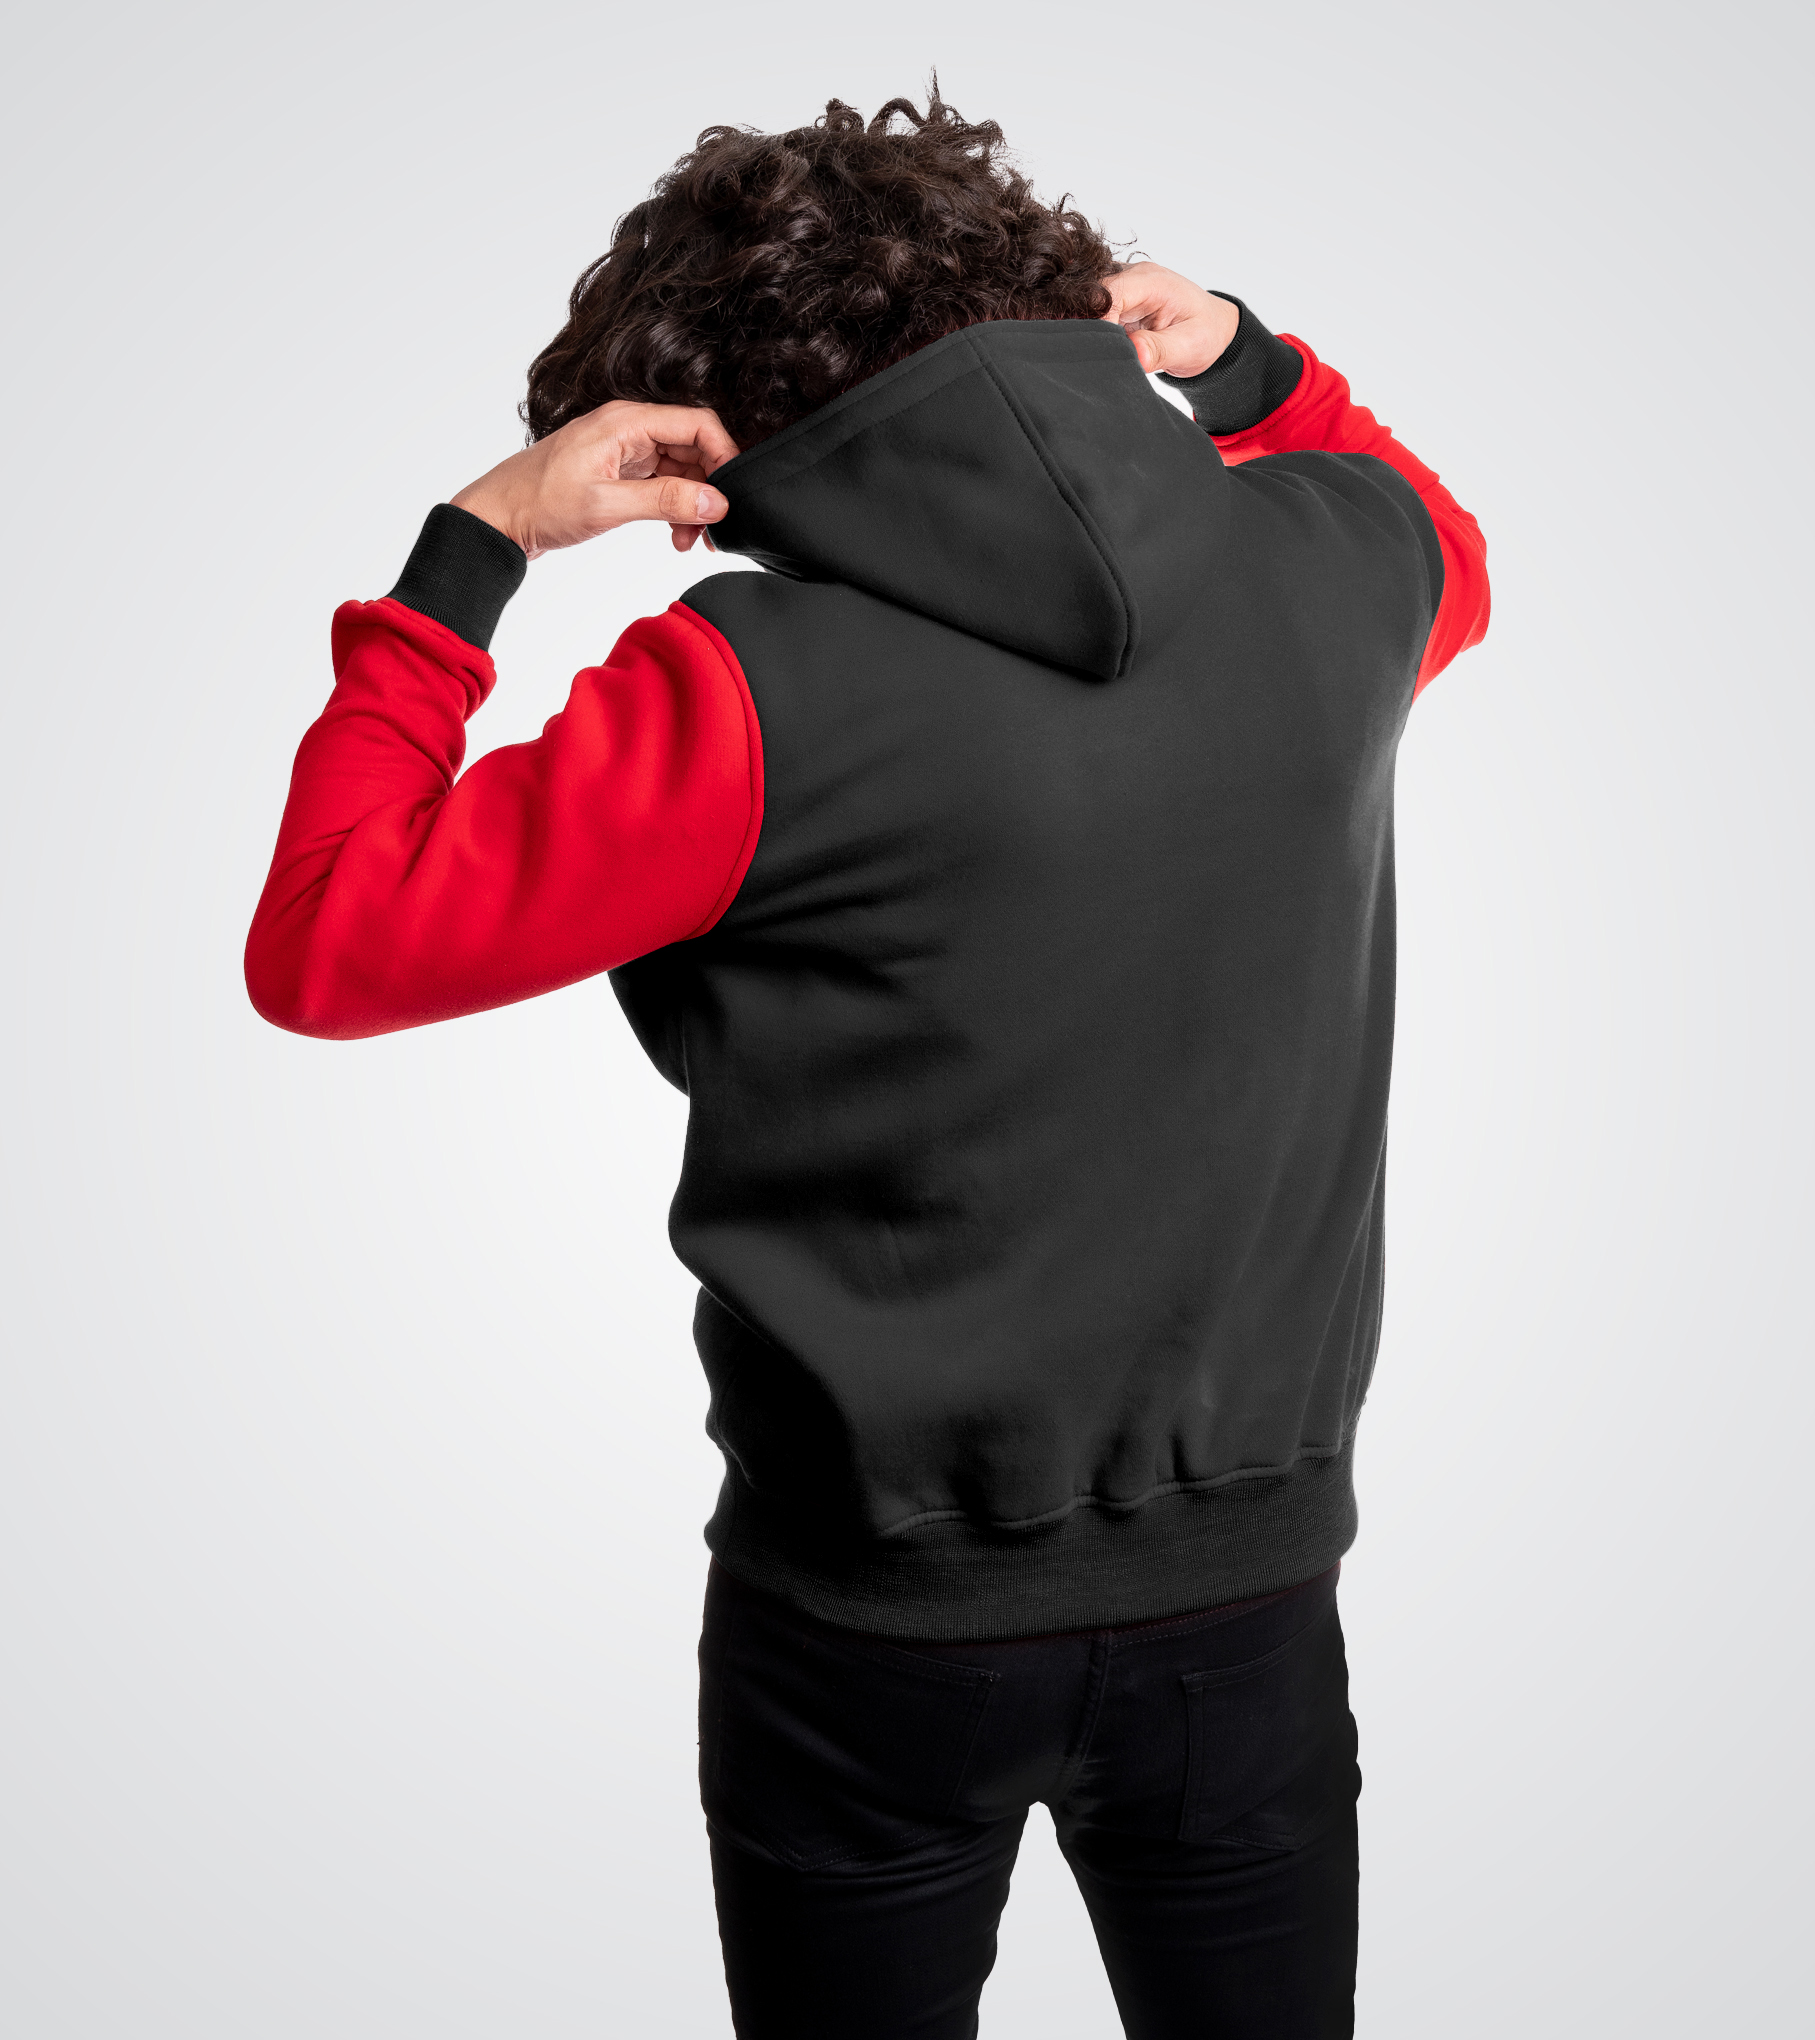 Black and Red Heavy Blend Pullover Sweatshirt